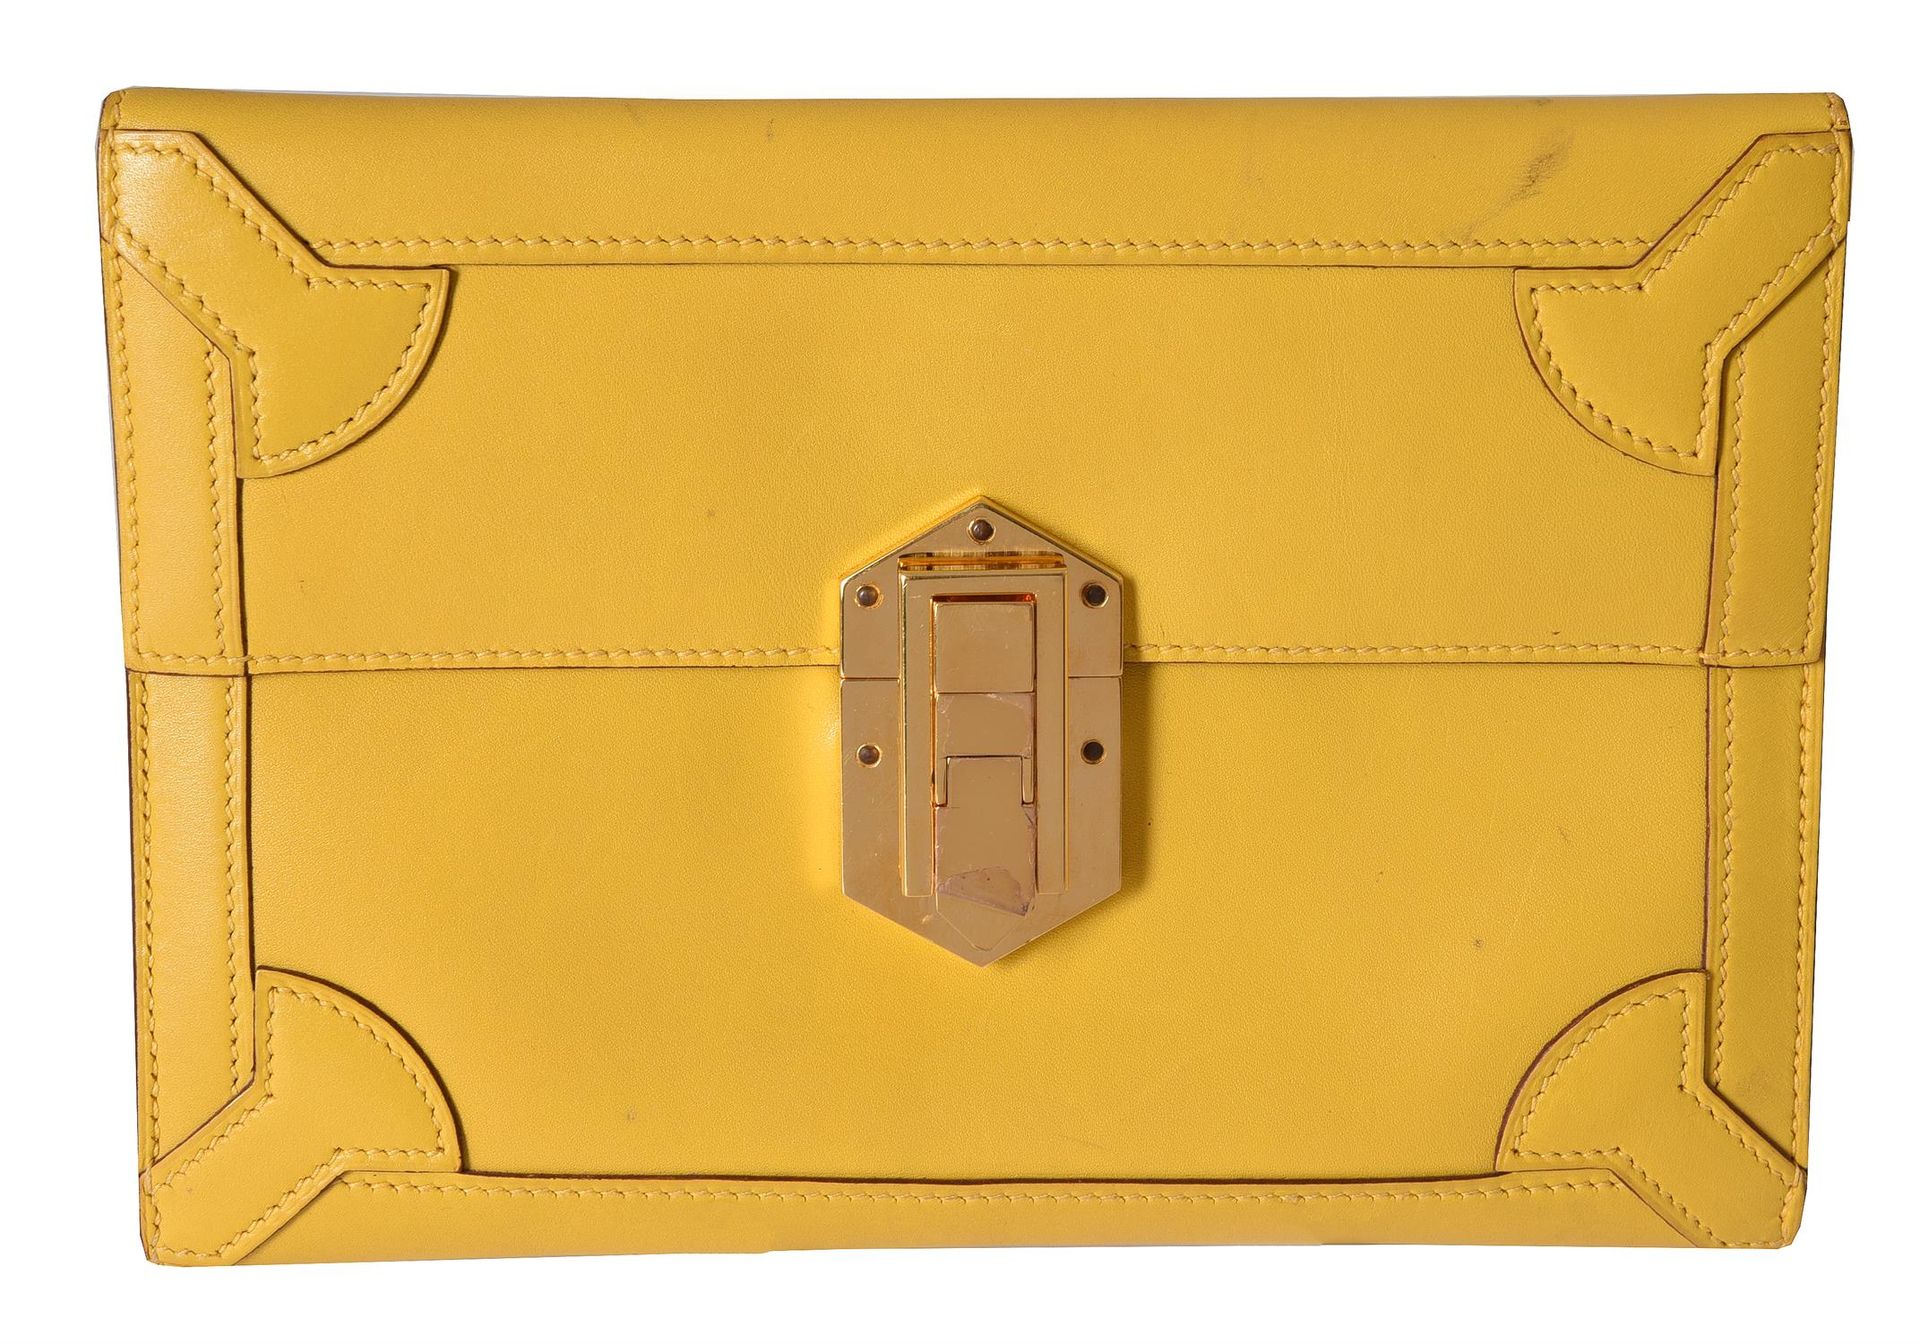 Hermes, a yellow leather clutch bag Hermes, a yellow leather clutch bag, with a &hellip;